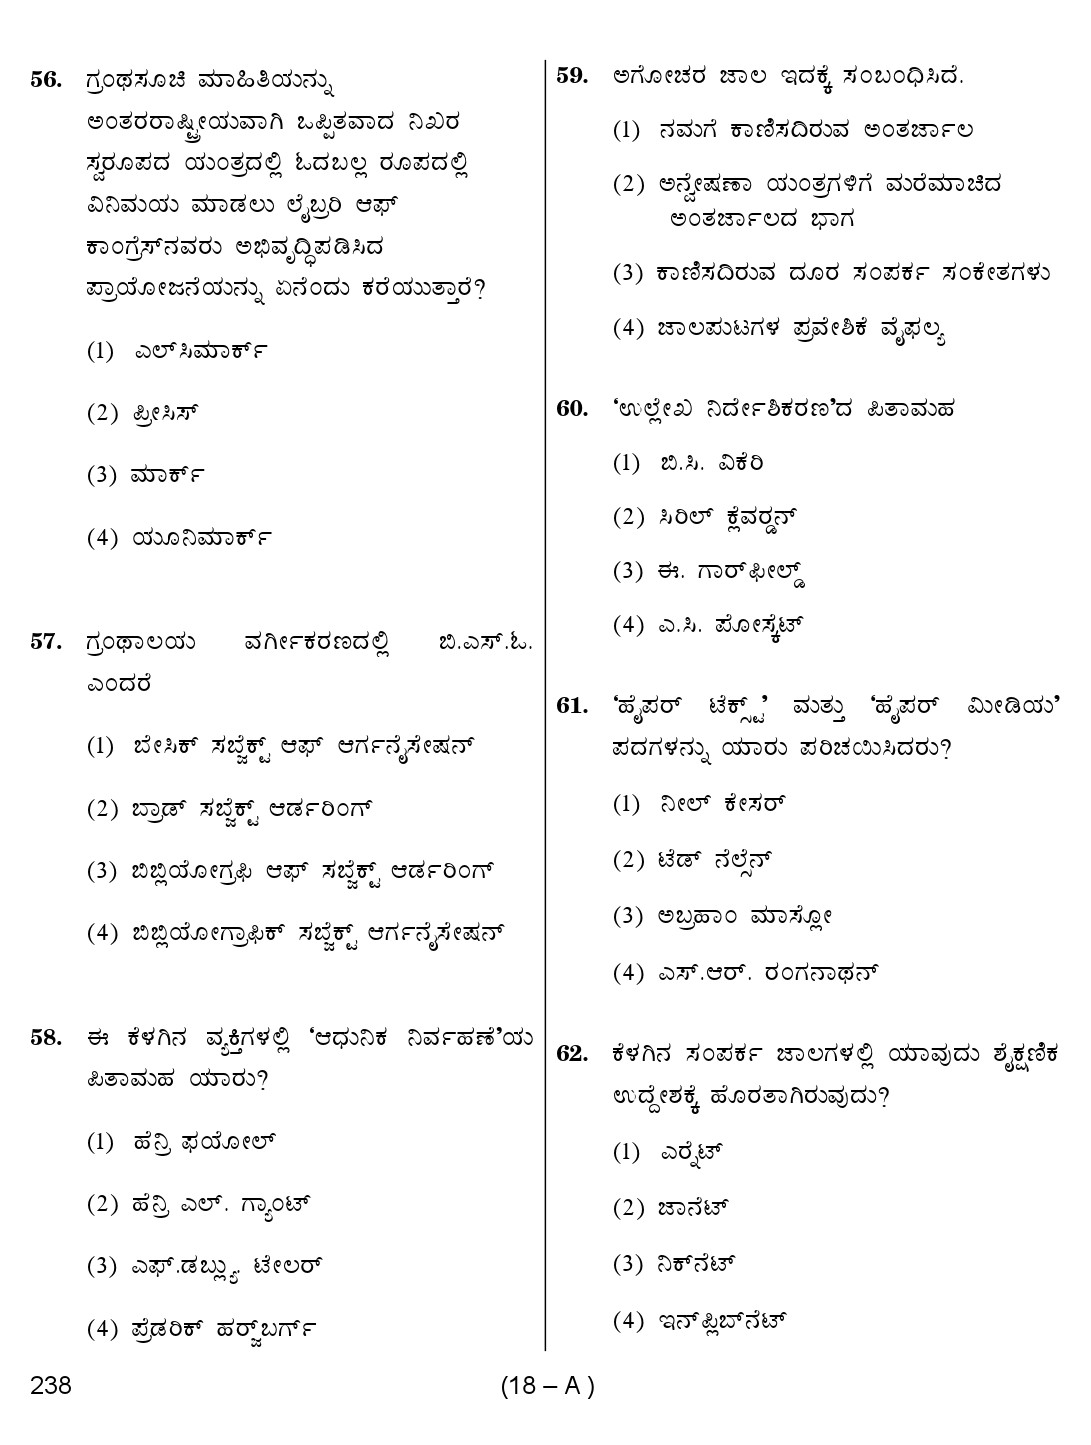 Karnataka PSC 238 Specific Paper II Librarian Exam Sample Question Paper 18